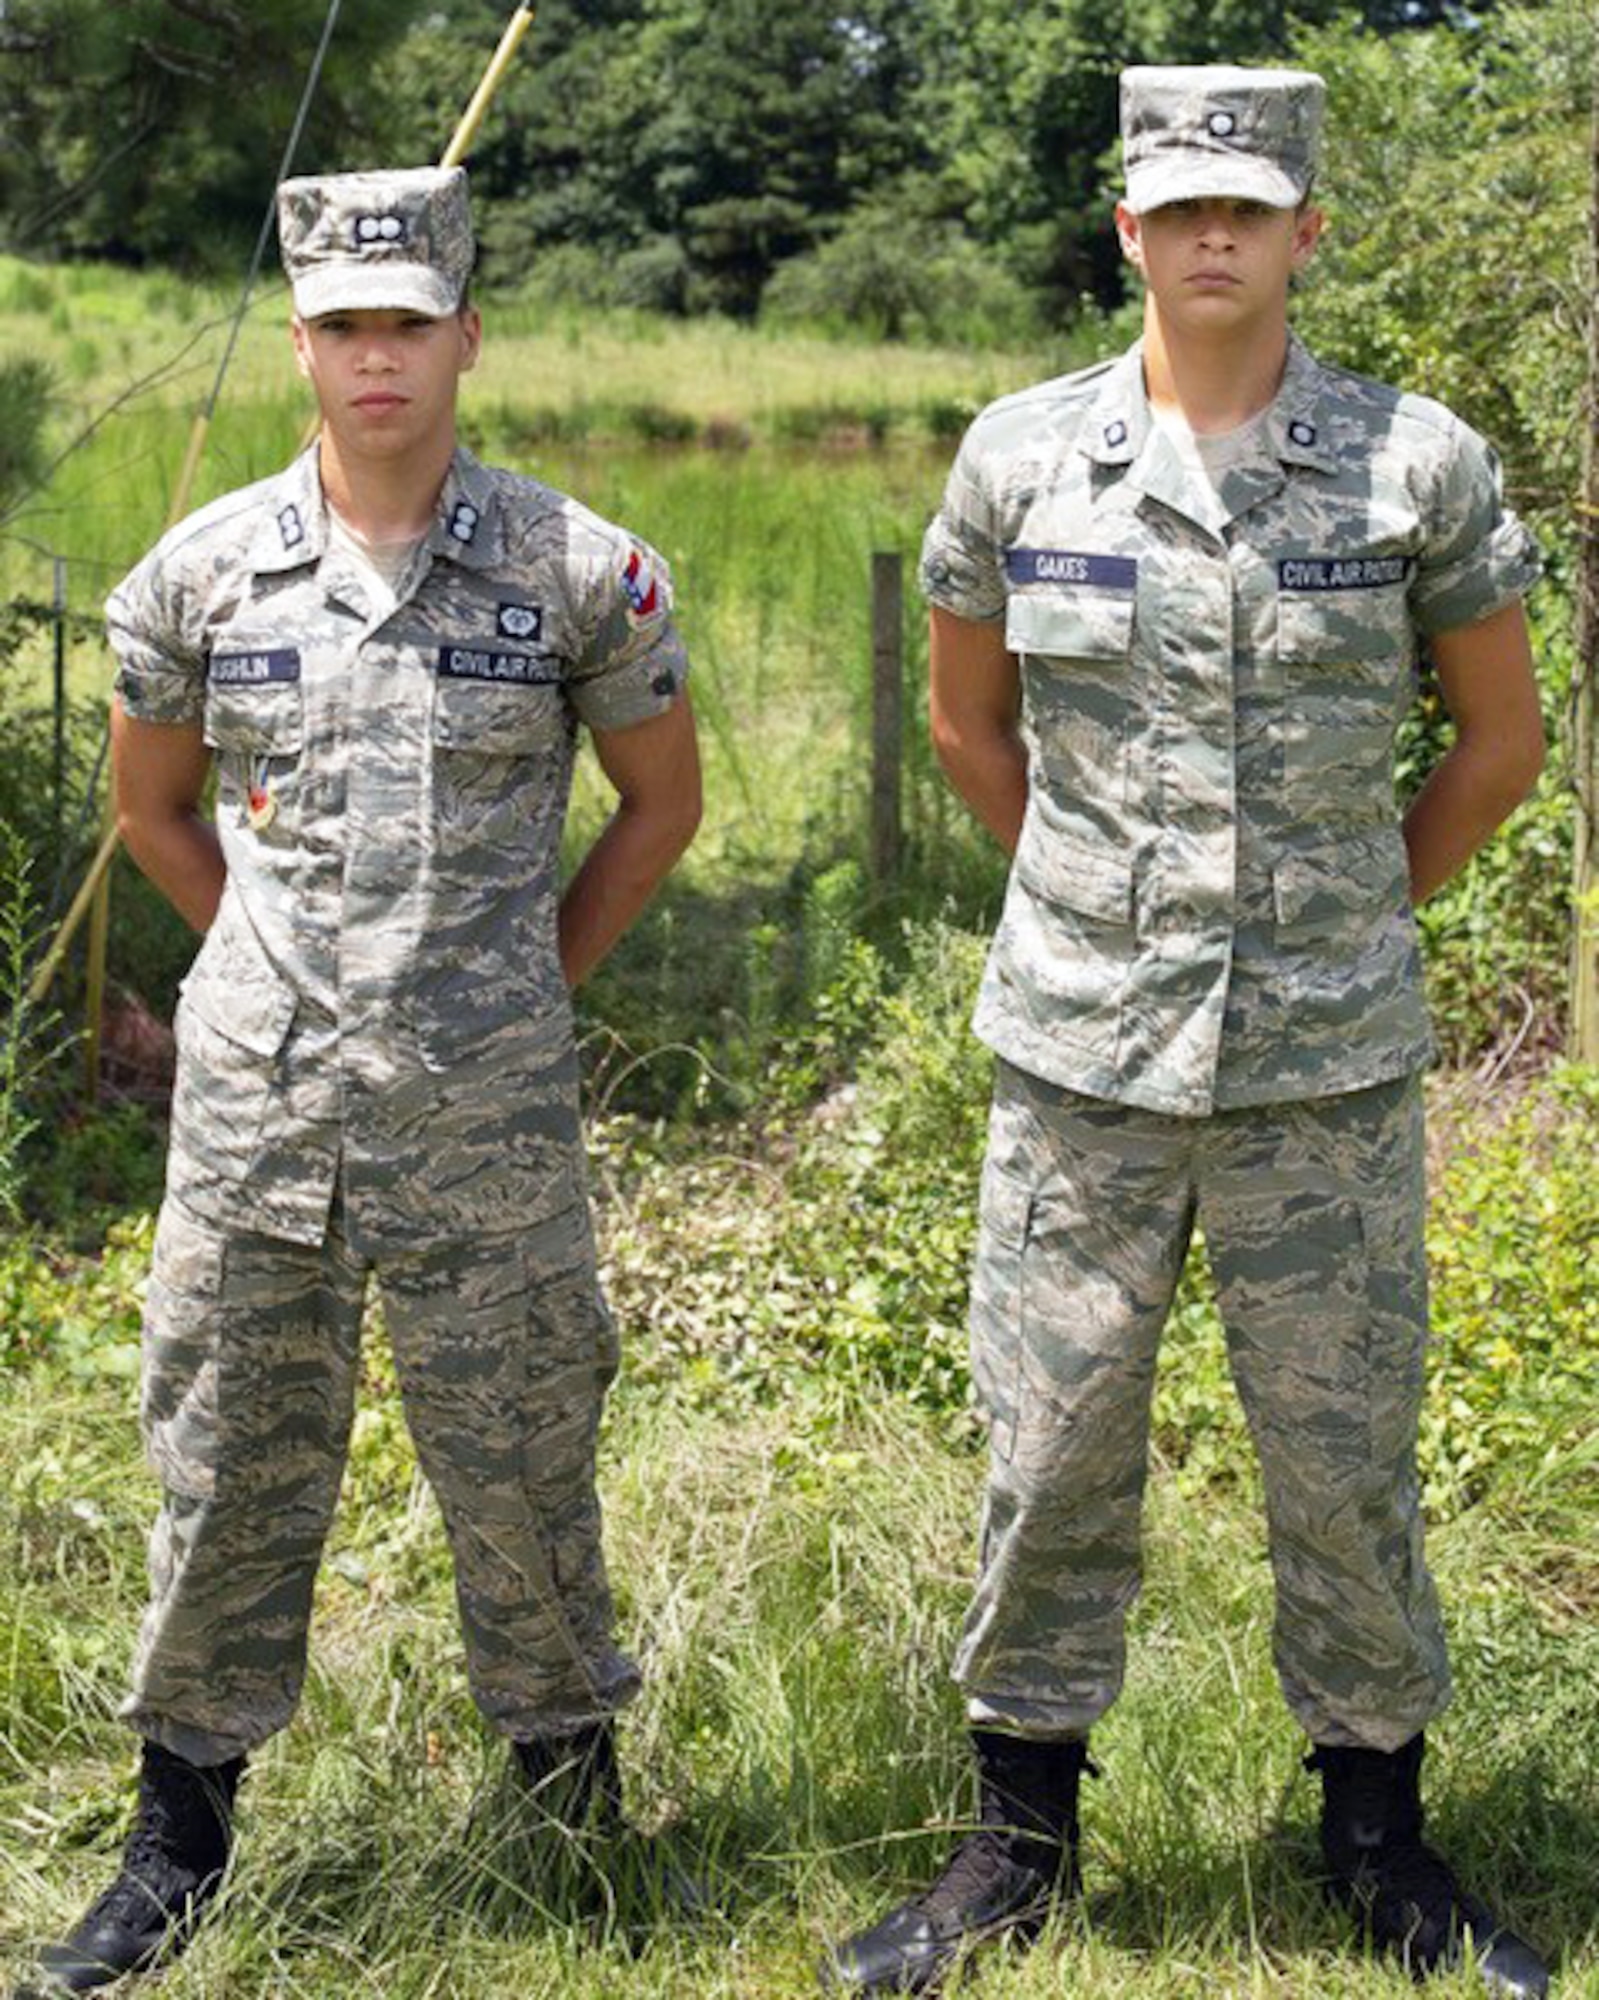 Cadet 1st Lt. Davis Laughlin (left) and Cadet 2nd Class Nathaniel Justin Oakes, members of the Peachtree City Falcon Field Composite Squadron of the Civil Air Patrol, were credited with saving a man's life following a multi-car accident Aug. 2, 2018, in Coweta County, Ga. Both Laughlin and Oakes credited their CAP training for their actions that night. (Courtesy photo)